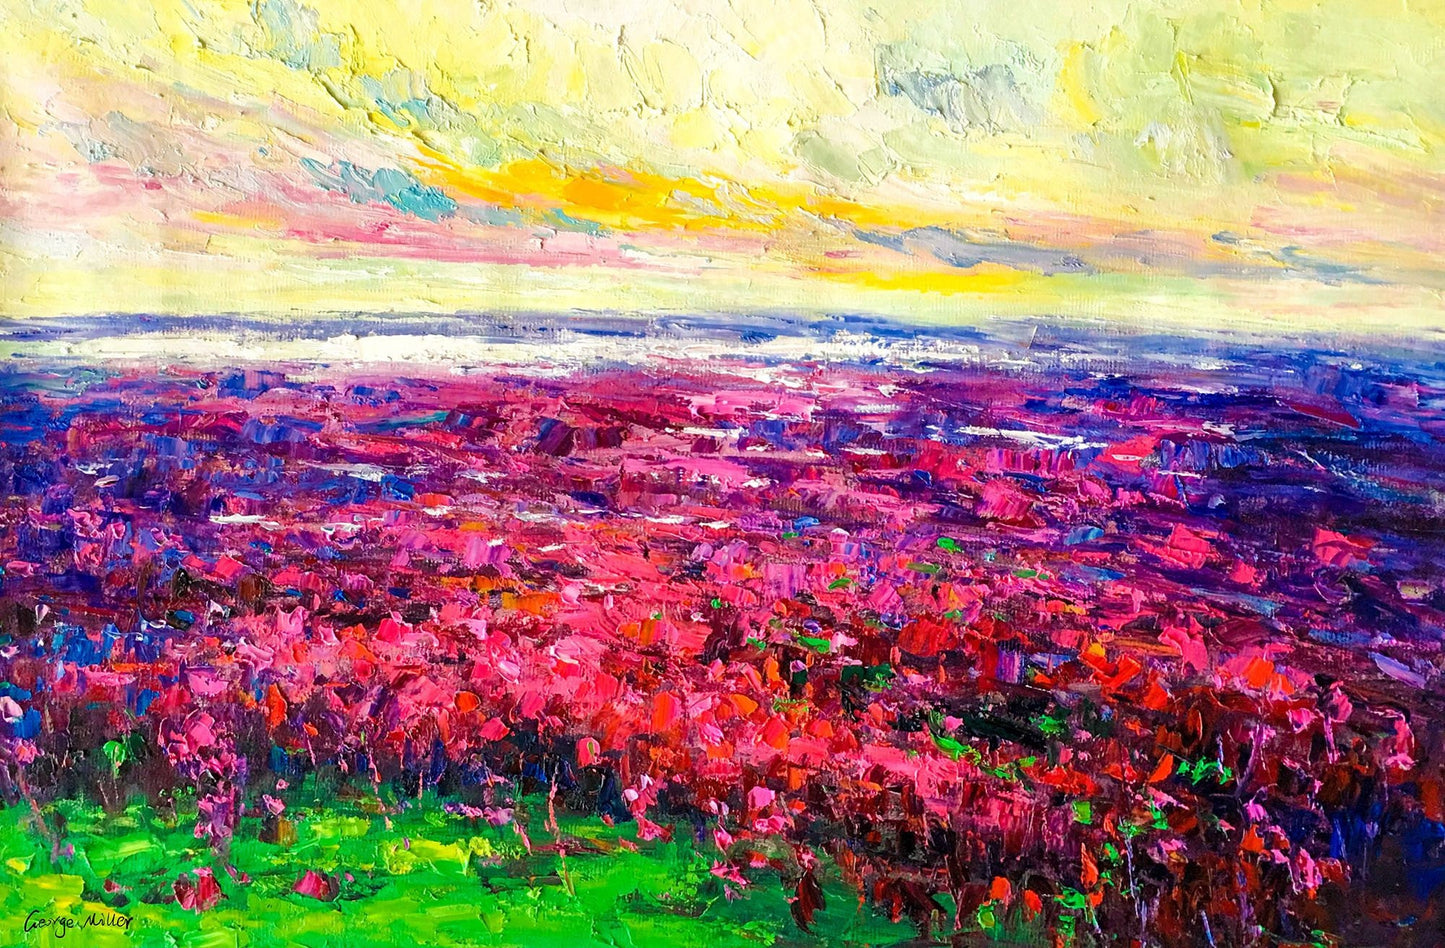 Large Landscape Oil Painting Spring Flower Fields Red and Purple, Modern Painting, Kitchen Wall Art, Canvas Art, Large Landscape Painting